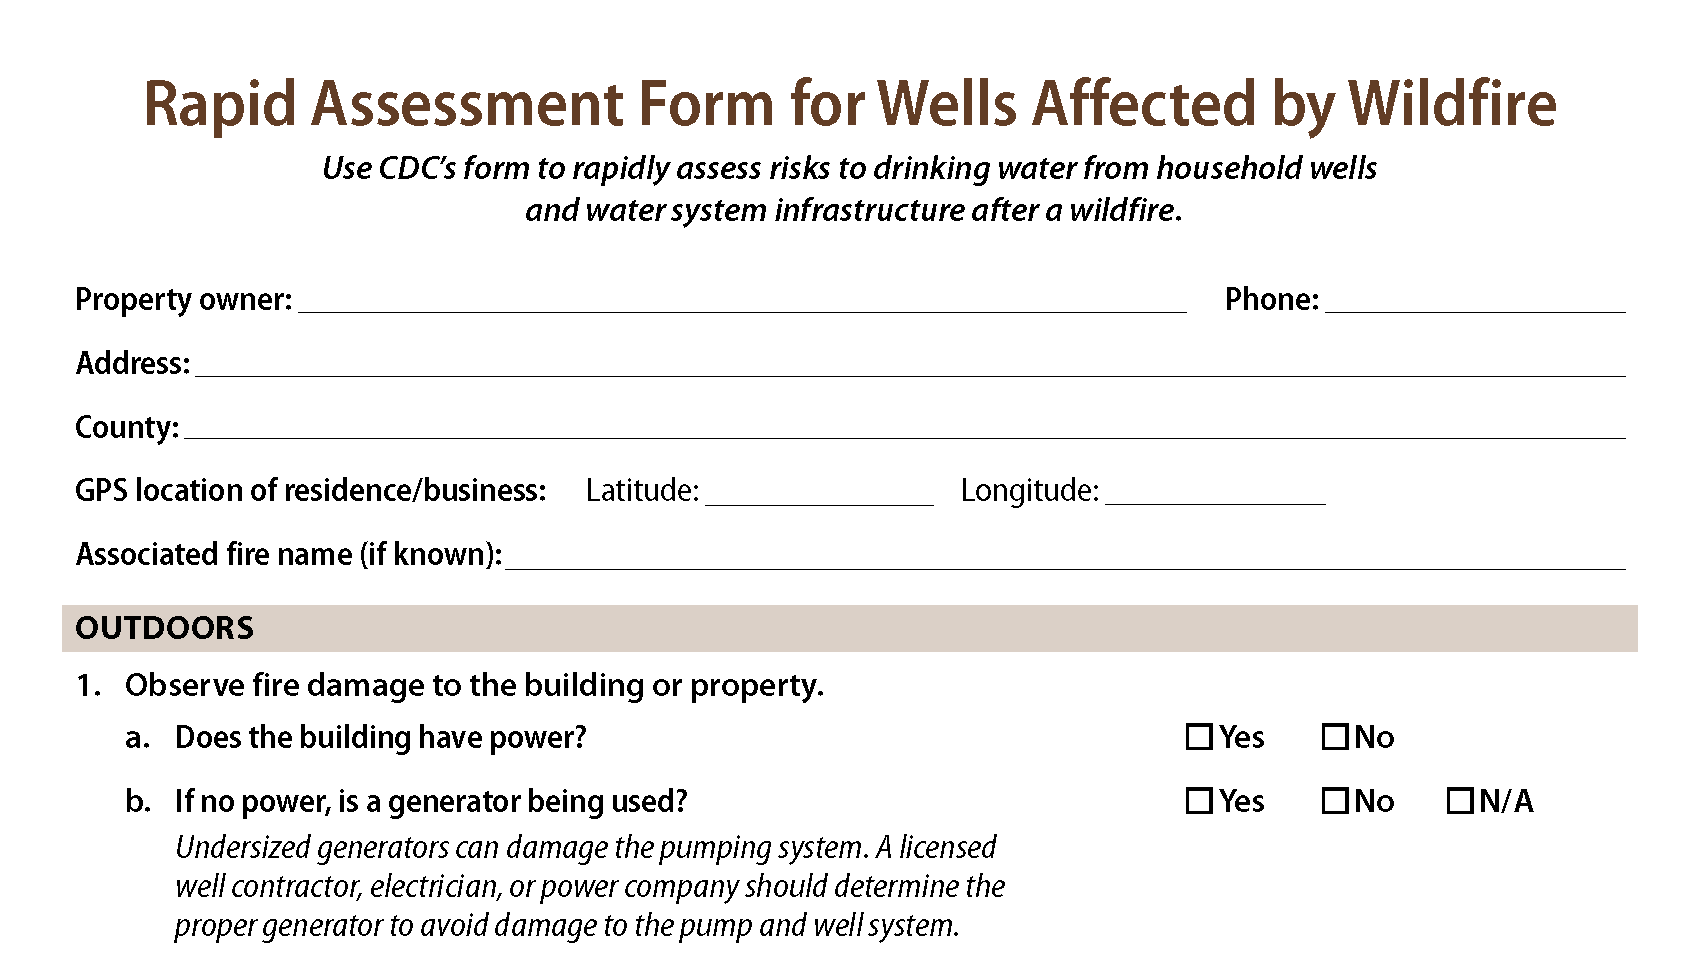 Top part of CDC's rapid assessment form.